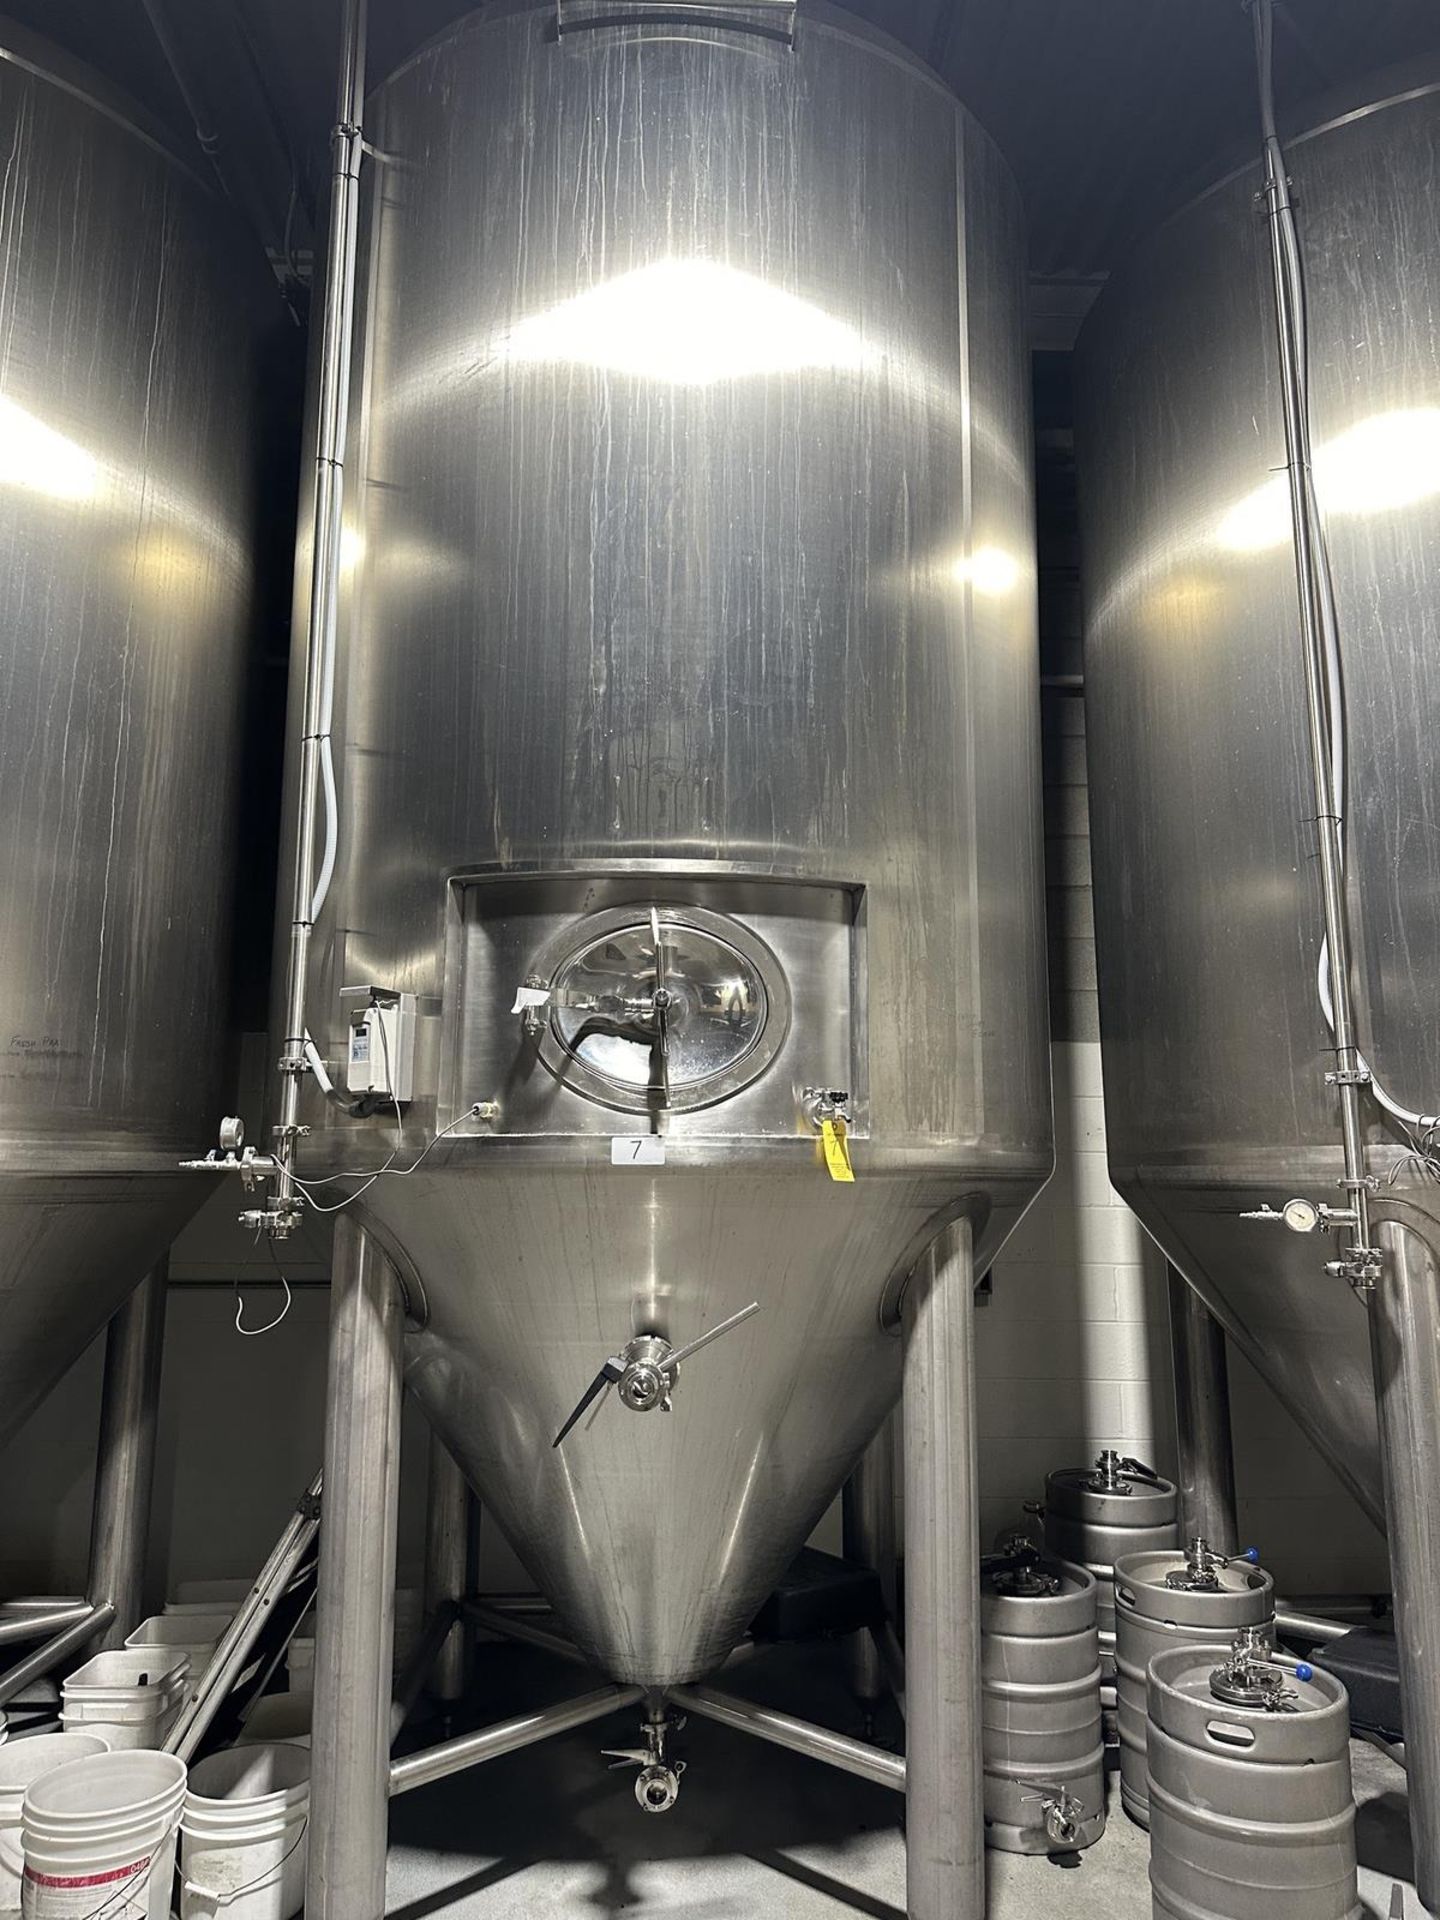 Criveller 60 BBL Stainless Steel Fermenter, Glycol Jacketed, Nema 4X Electronic Tem | Rig Fee $350